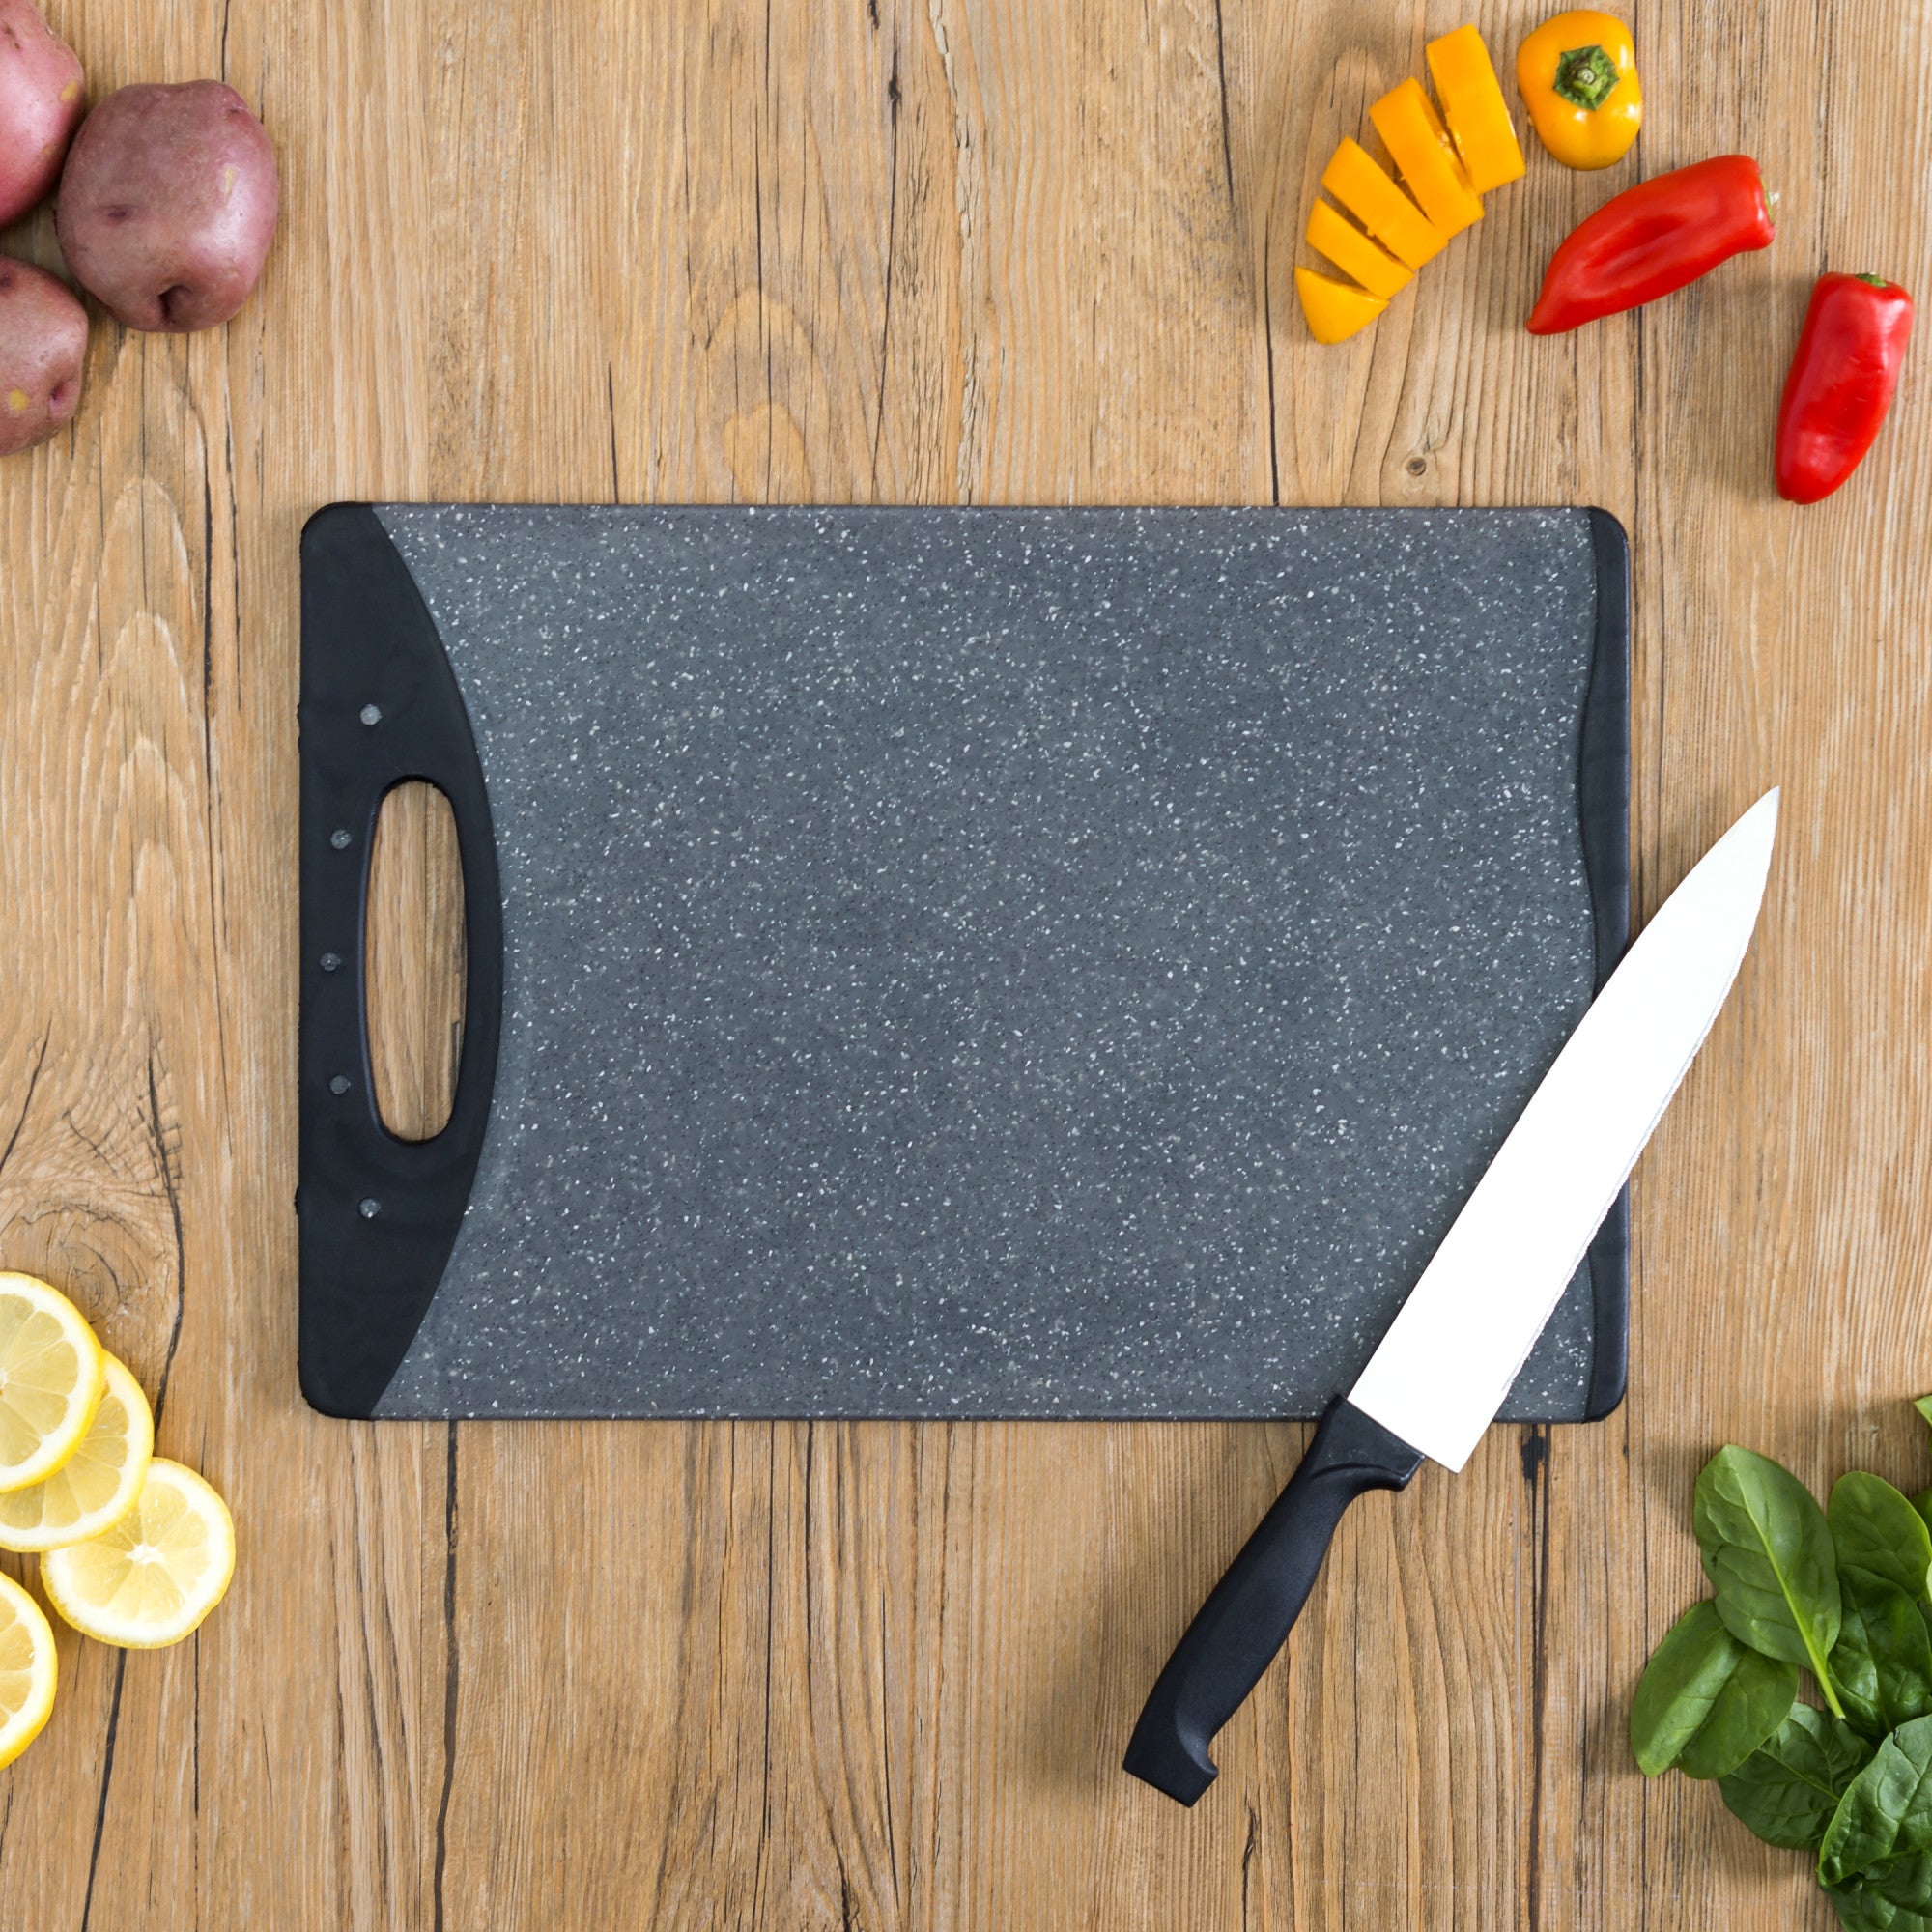 Home Basics Double Sided 10" x 14.5" Granite Plastic Cutting Board - Assorted Colors